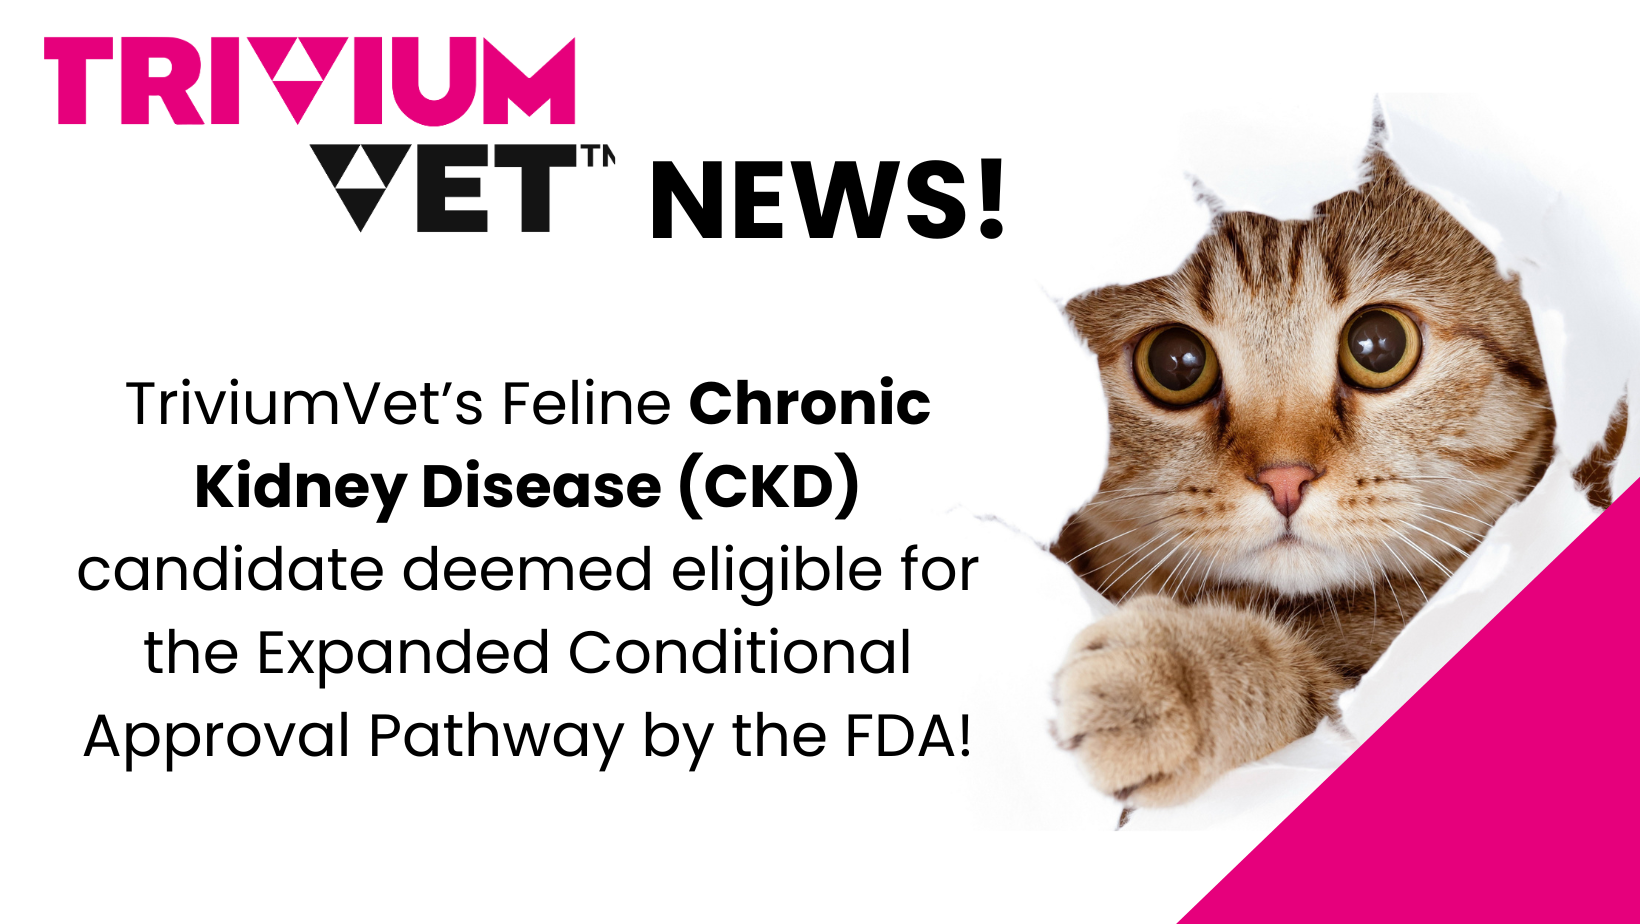 TriviumVet's Feline Chronic Kidney Disease (CKD) candidate deemed eligible for the Expanded Conditional Approval Pathway by the FDA! 